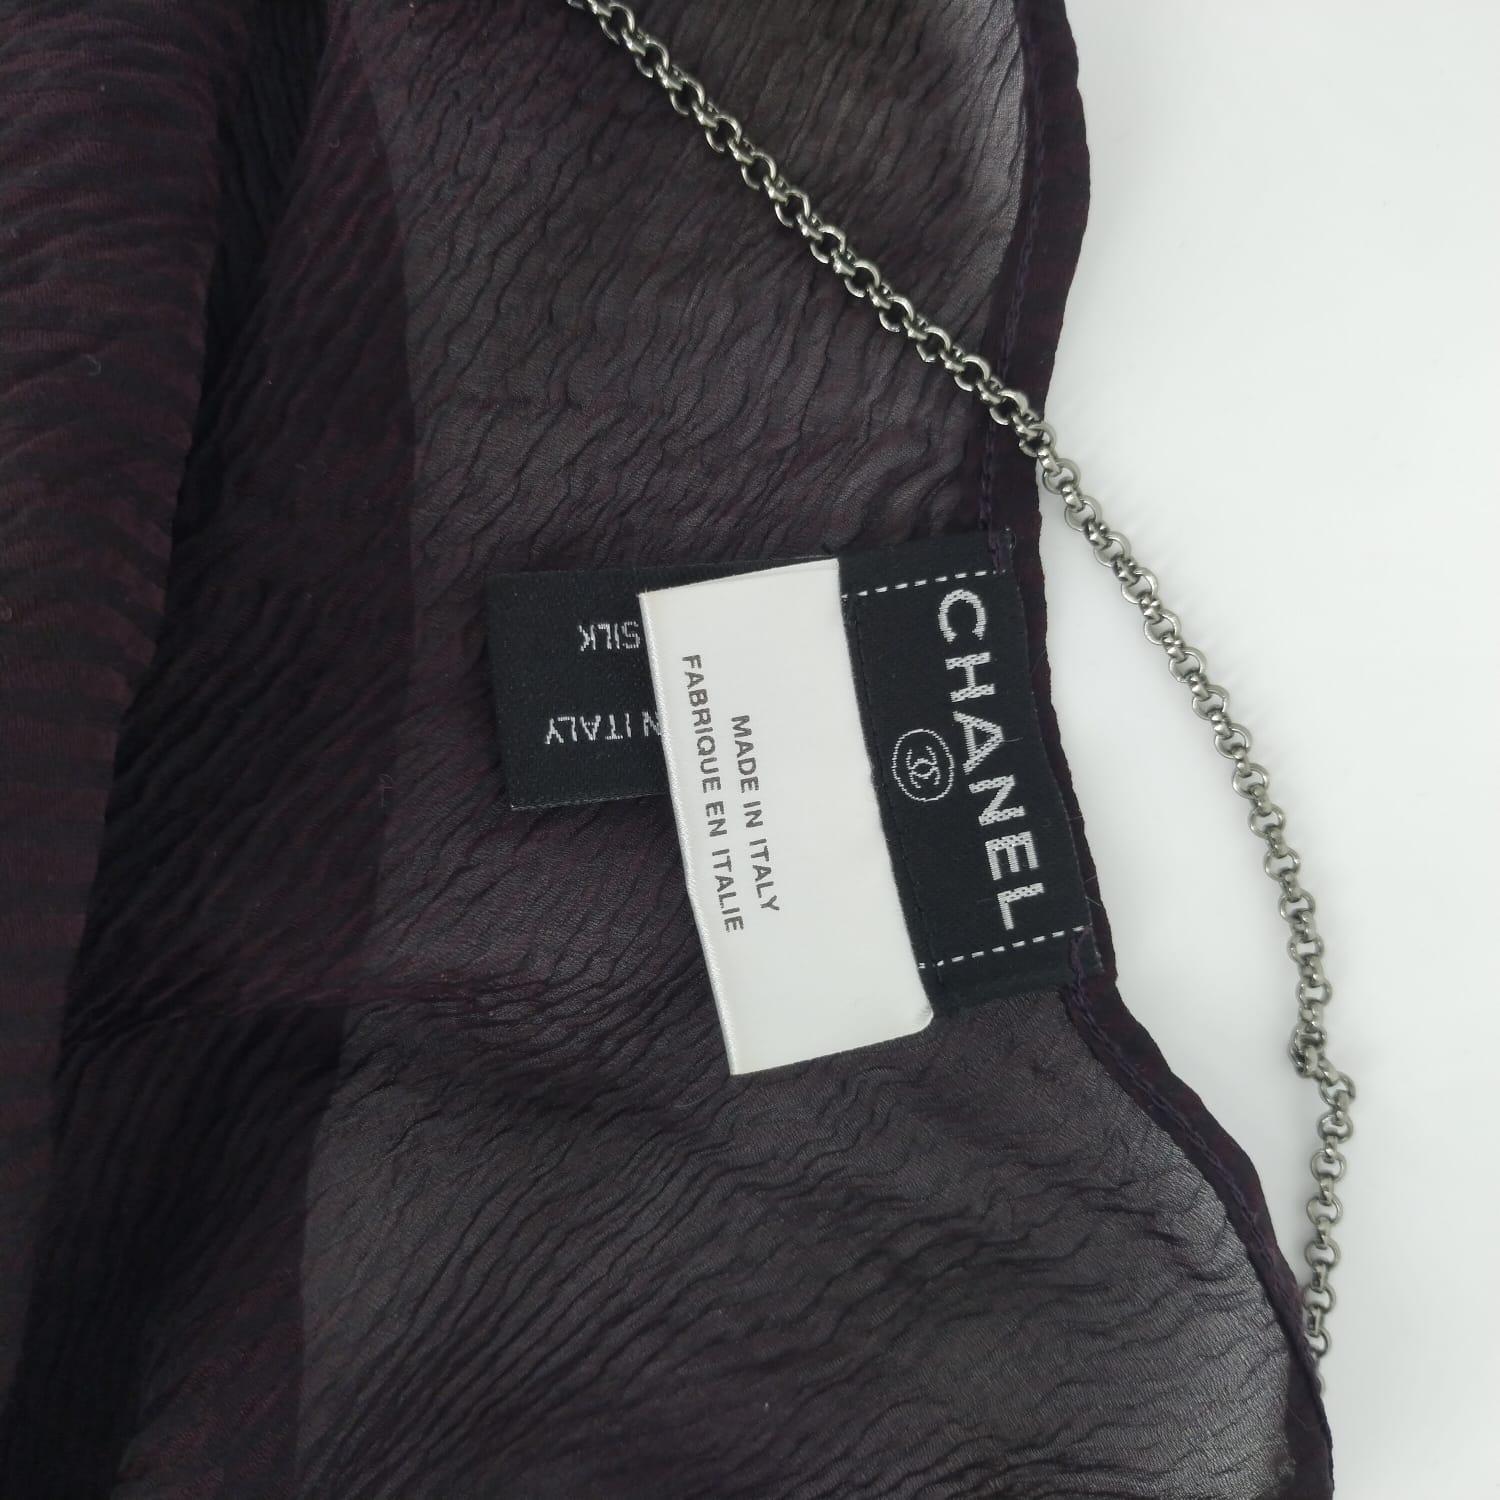 CHANEL 02A 2002-2003 Fall RTW cardigan / top Karl Lagerfeld  For Sale 10